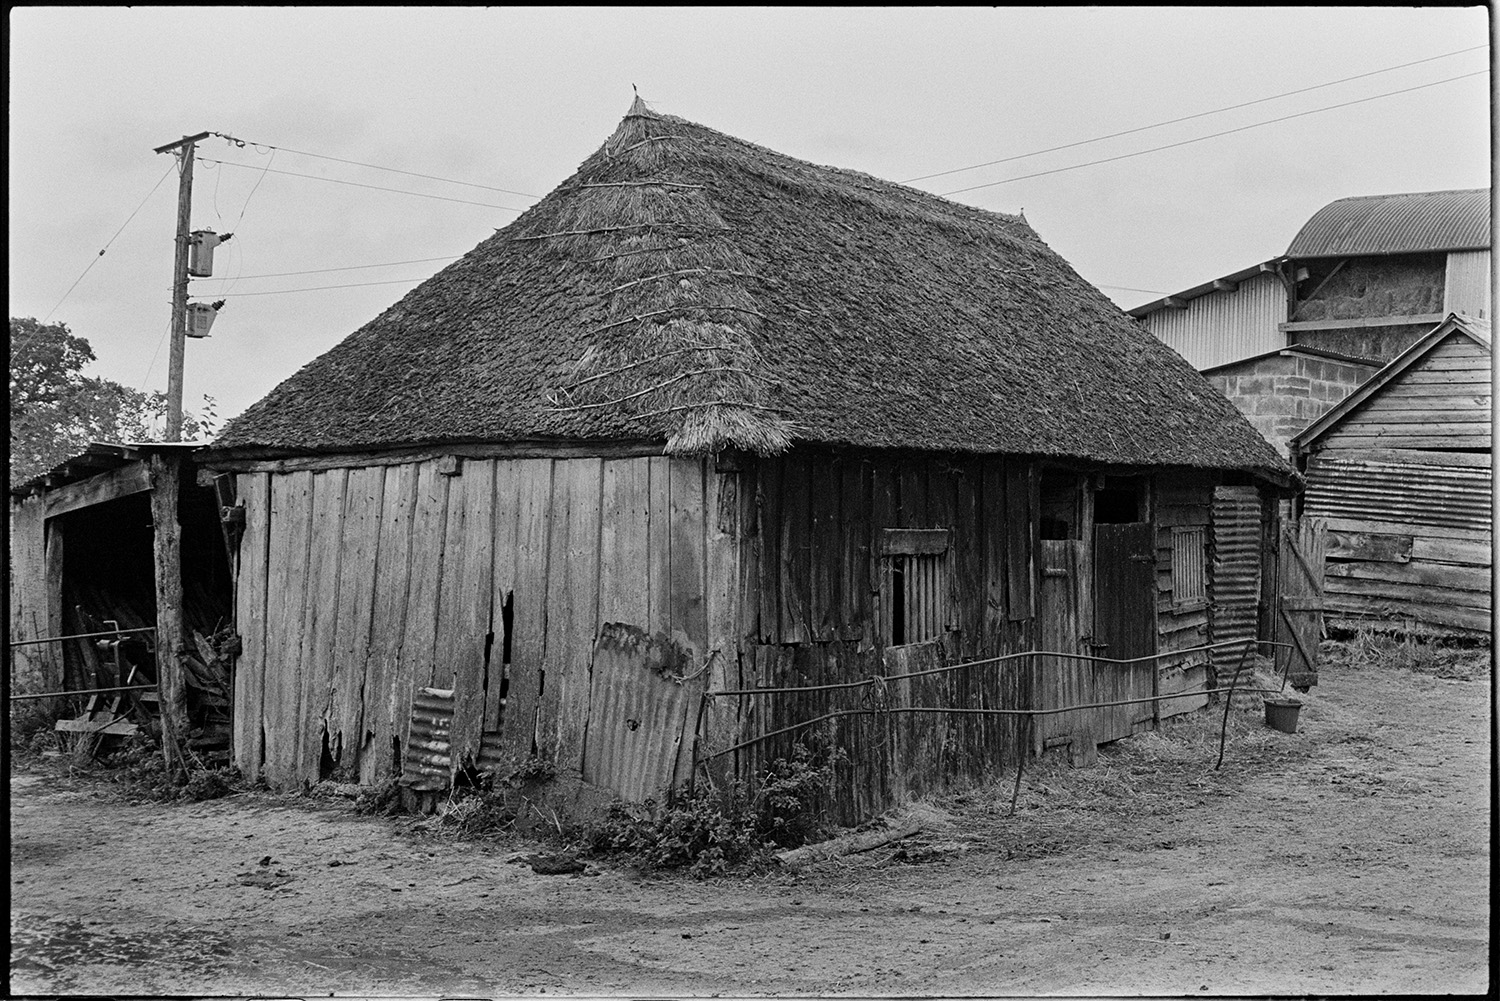 Wooden barn with thatched roof now demolished. 
[A wooden barn with a thatched roof at Leigh Farm, Chulmleigh. Other barns, one with hay bales, and farm buildings can be seen in the background.]